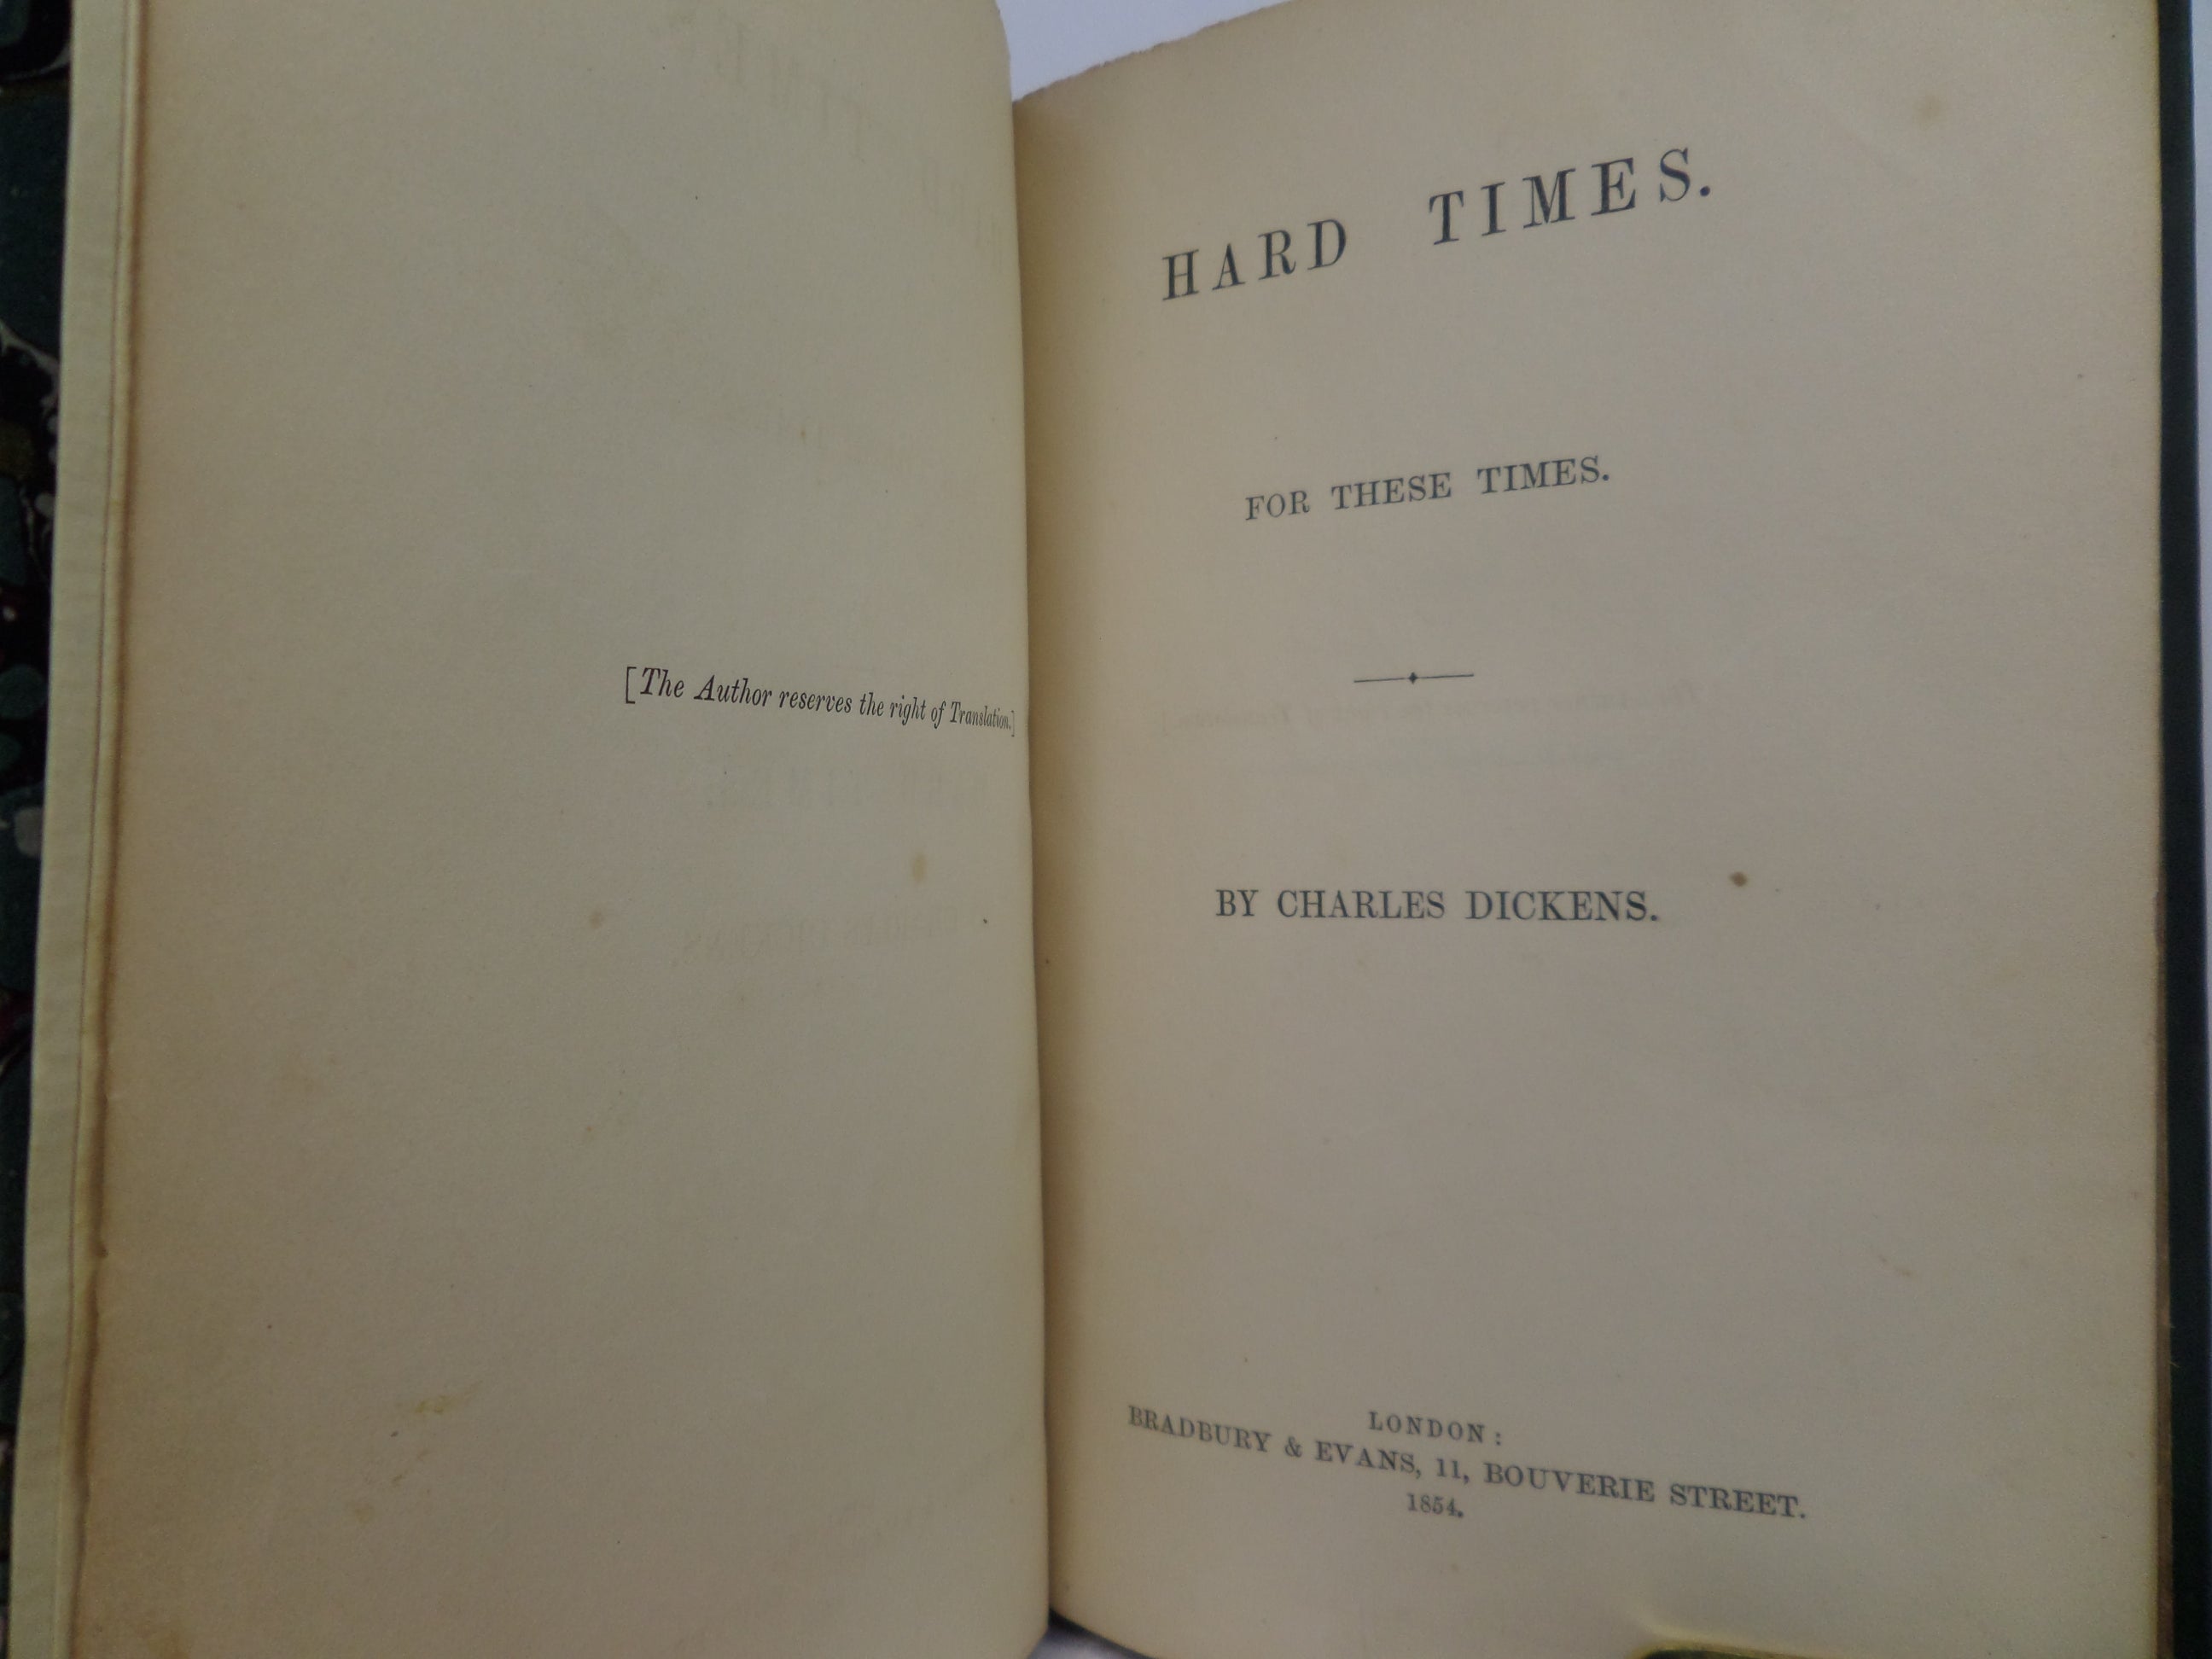 HARD TIMES BY CHARLES DICKENS 1854 FIRST EDITION FINE LEATHER BINDING